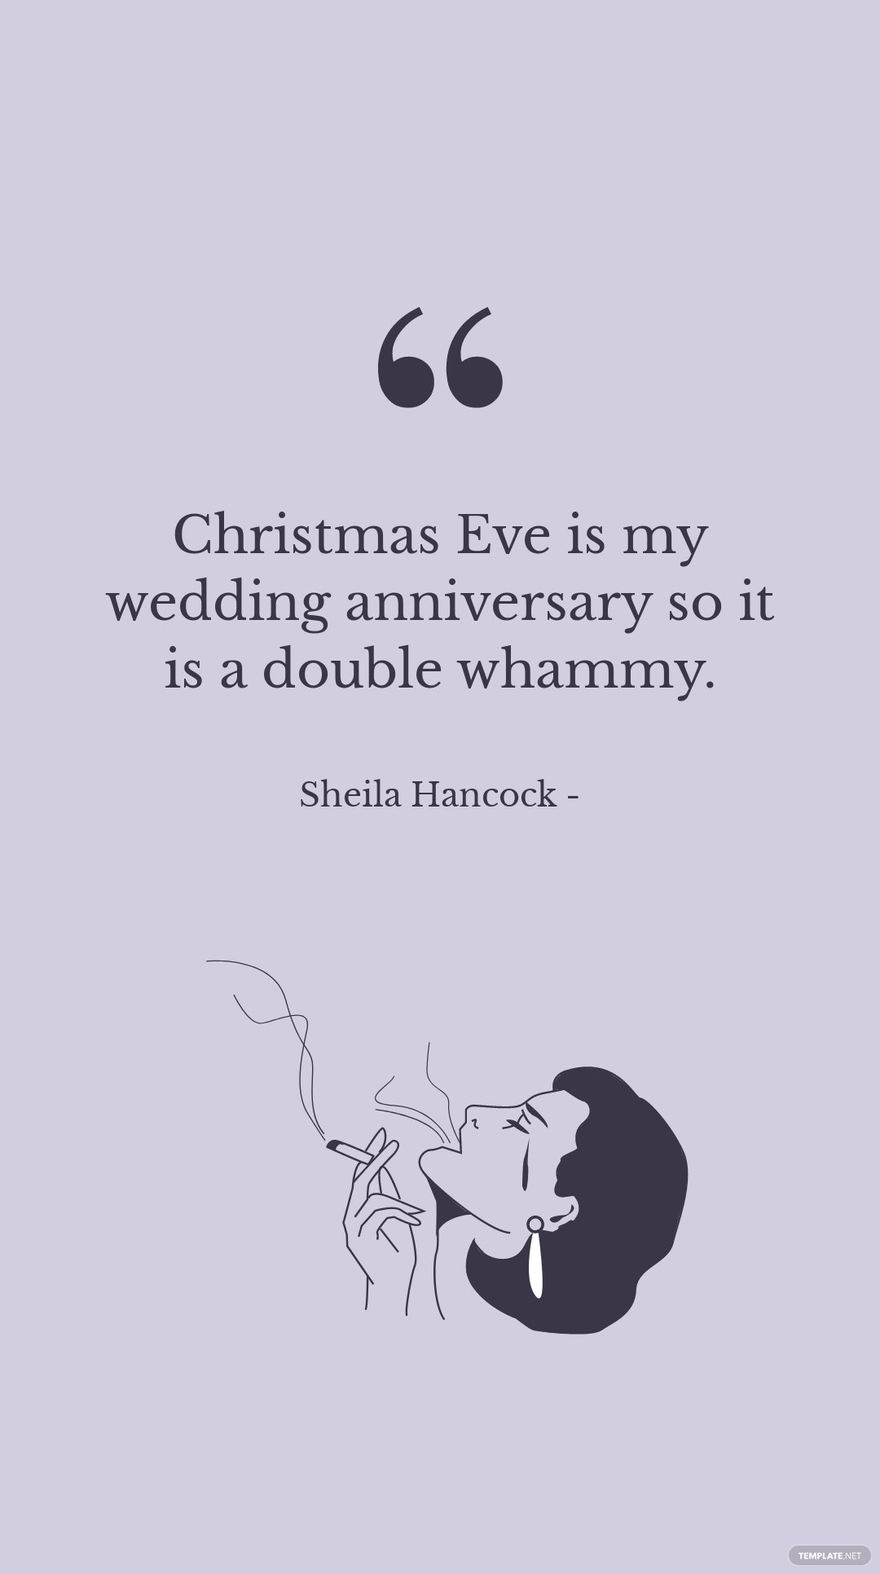 Free Sheila Hancock - Christmas Eve is my wedding anniversary so it is a double whammy. in JPG